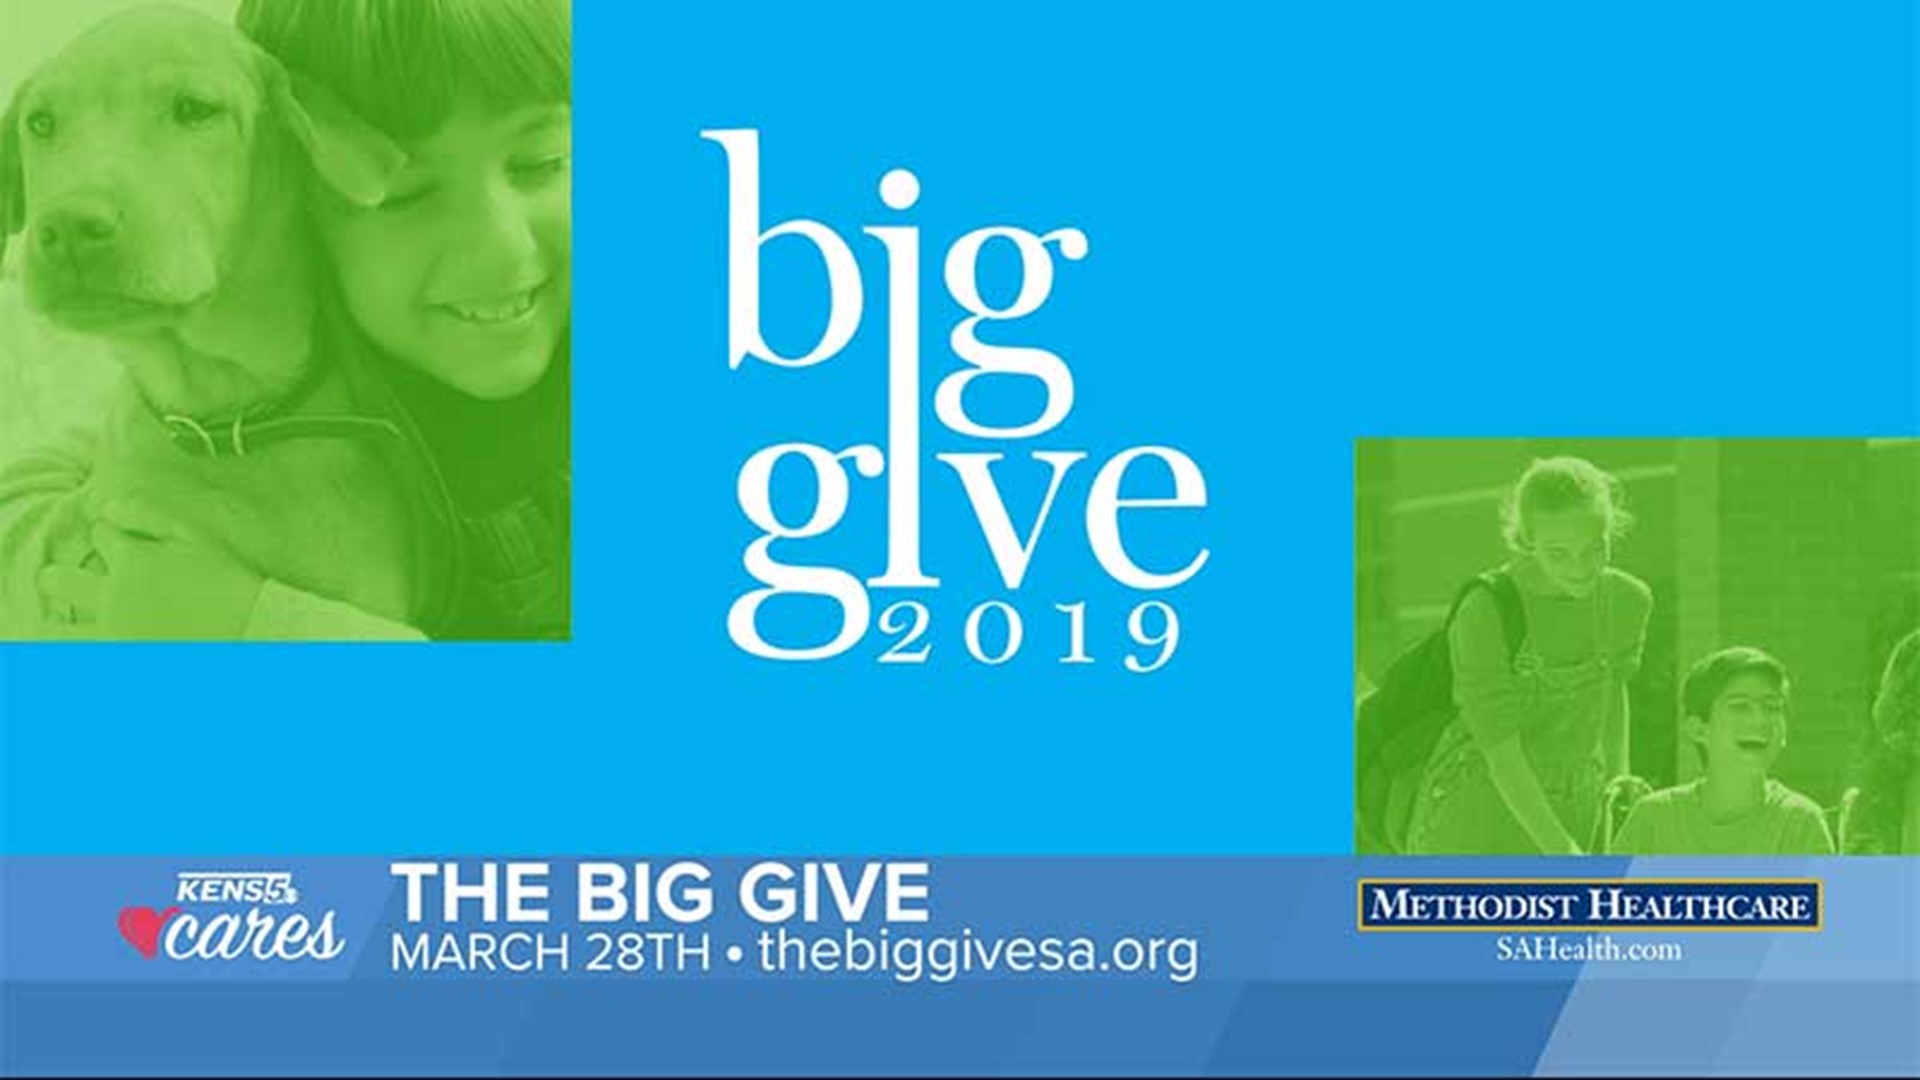 Since 2014, 188,937 donors have given more than $20 million to more than 2,000 nonprofits through The Big Give.